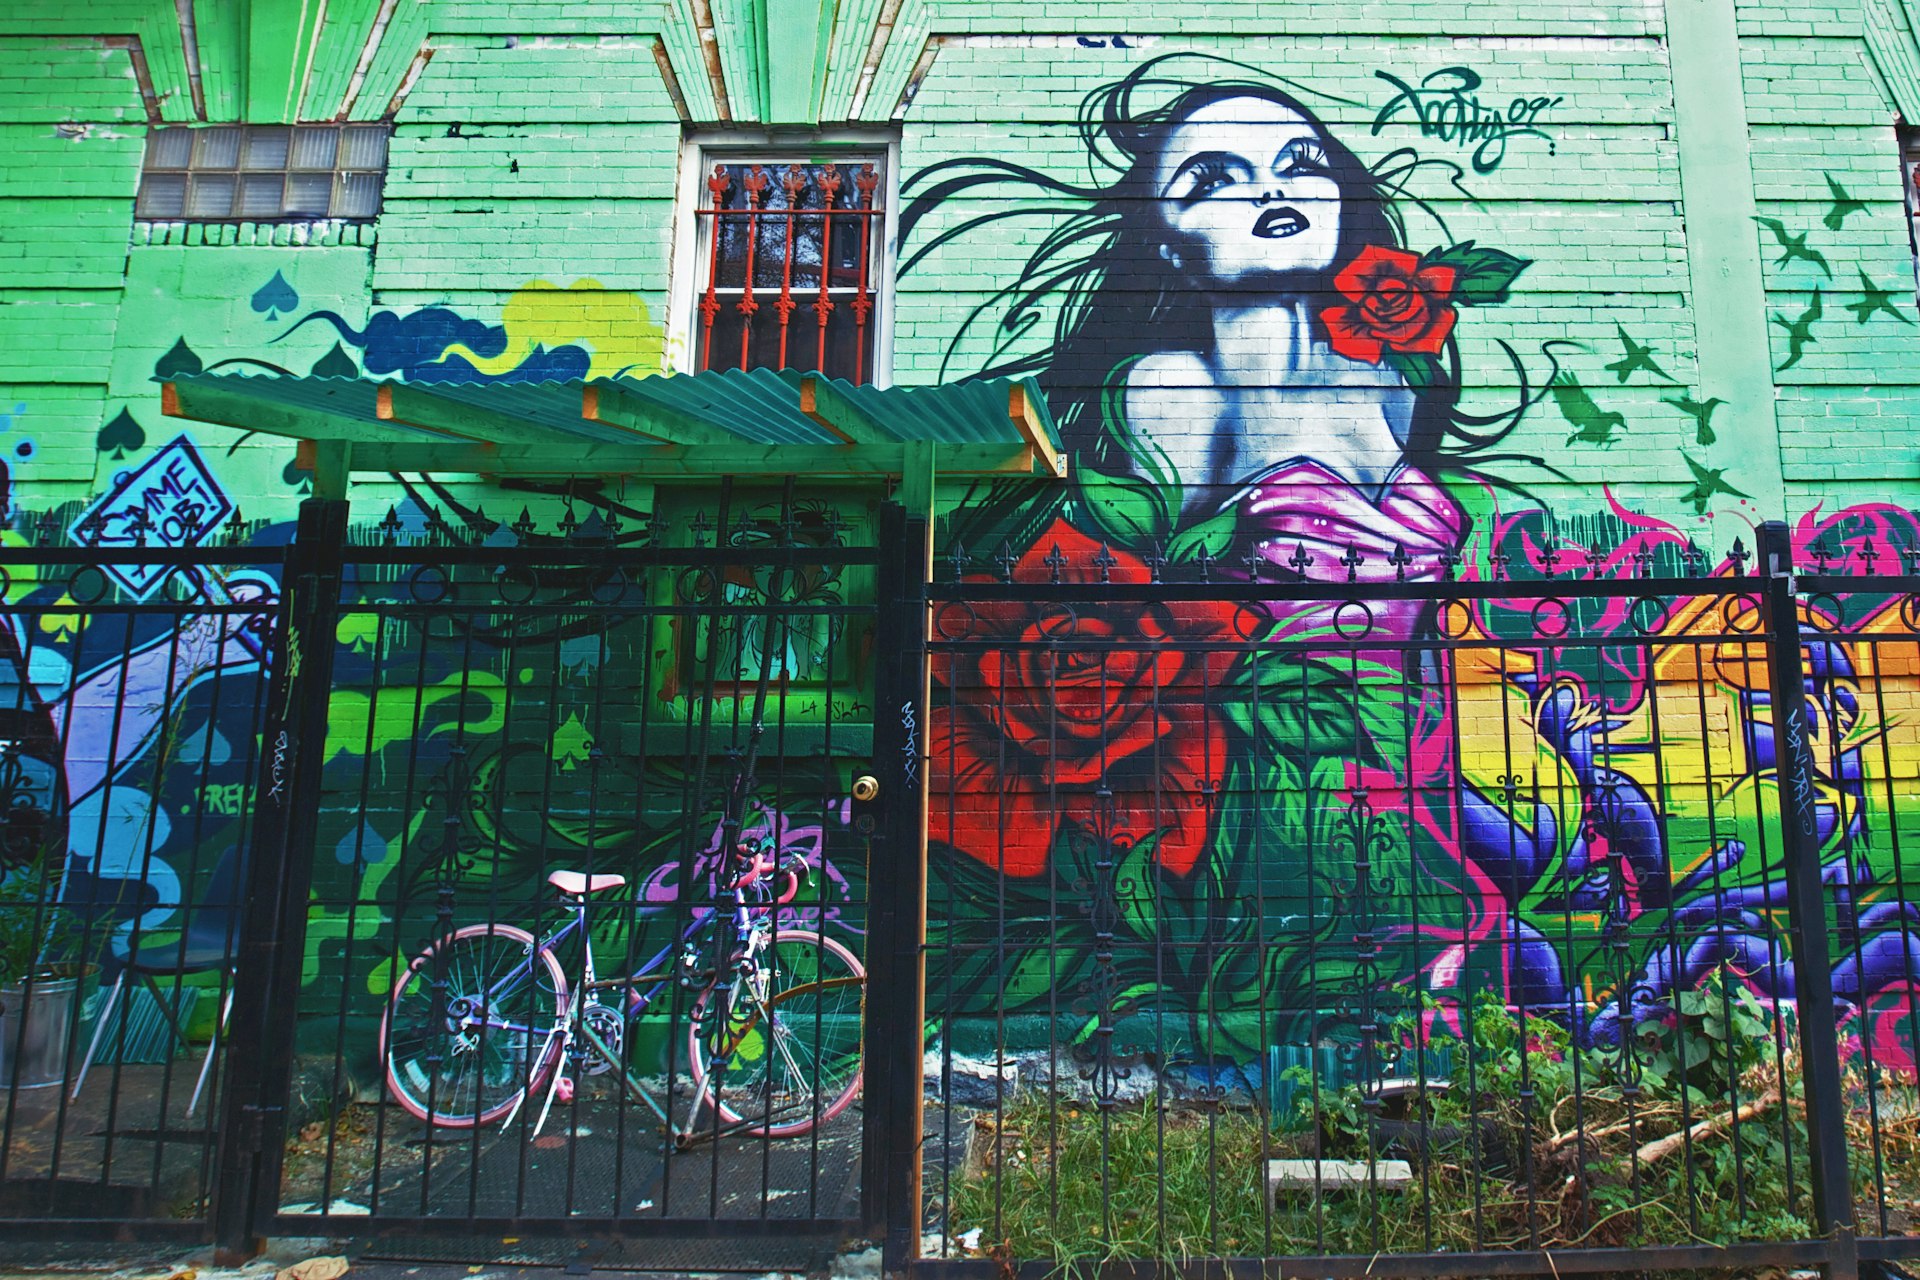 Pink bike behind the fence near painted mural in Williamsburg New York City